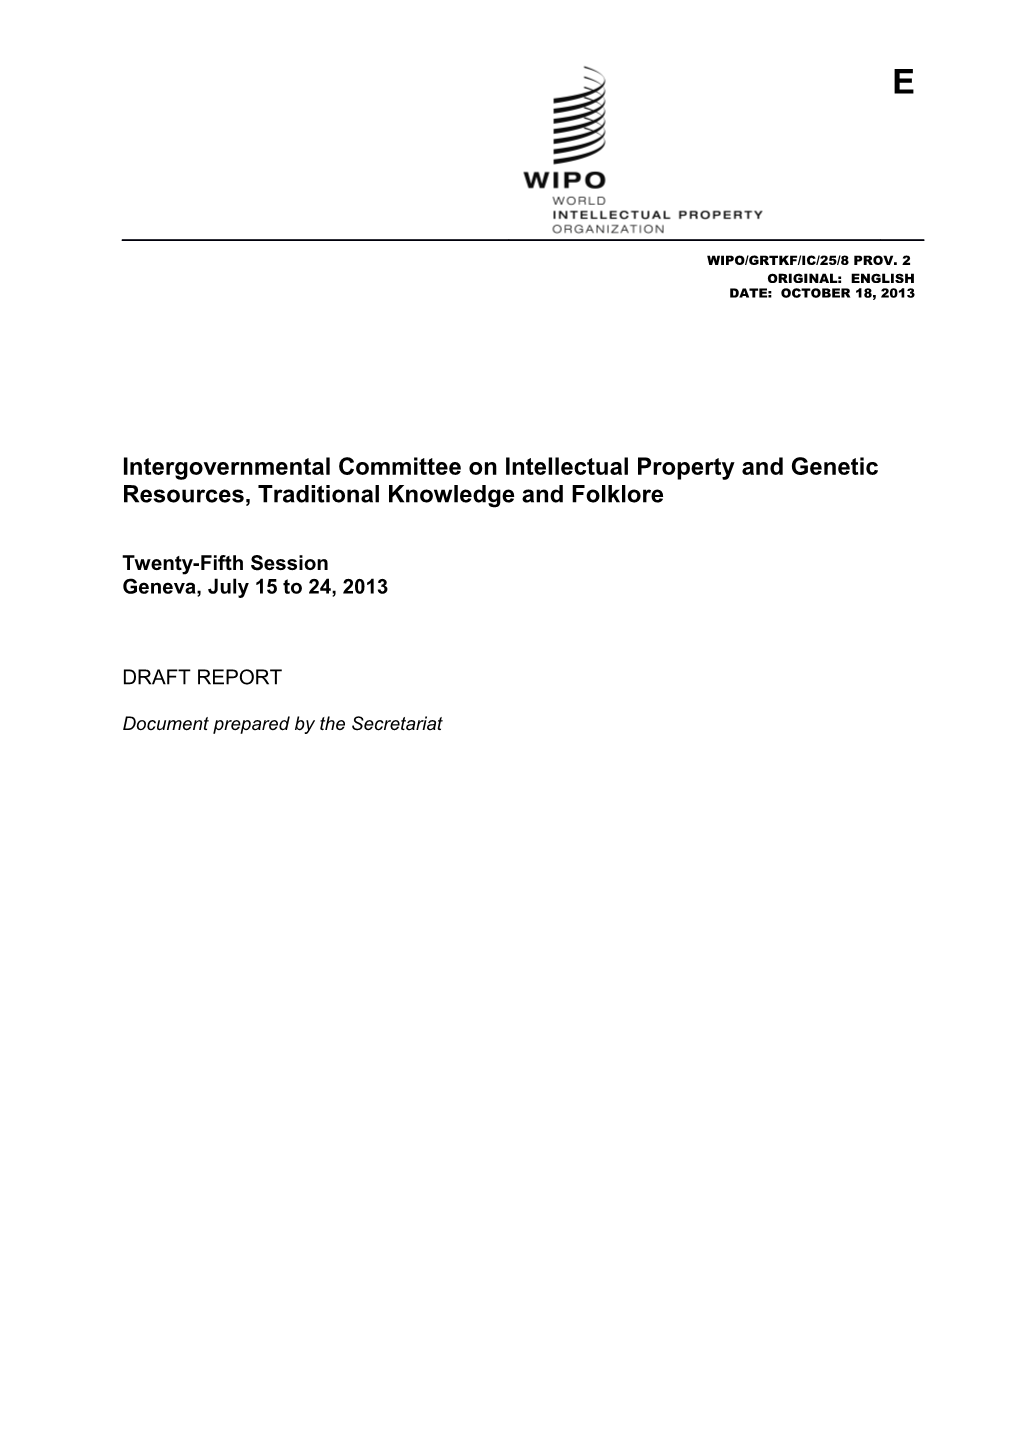 Intergovernmental Committee on Intellectual Property and Genetic Resources, Traditional